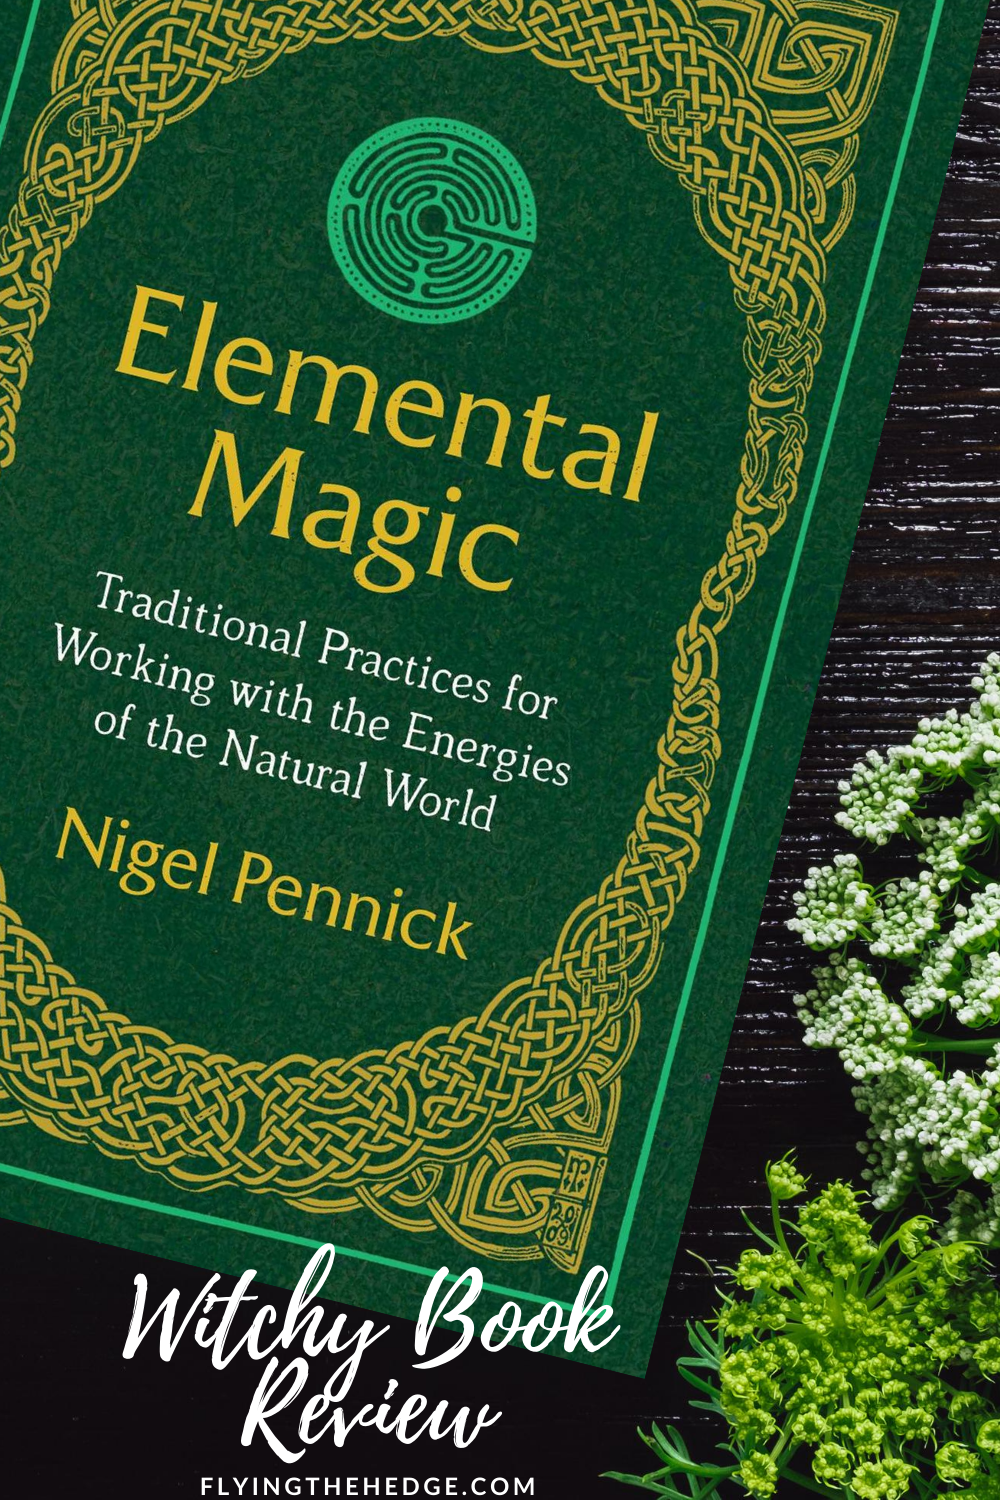 book review, witchy book review, elemental magic, Nigal Pennick, witchcraft, wicca, wiccan, witch, witchy, book, reading, pagan, neopagan